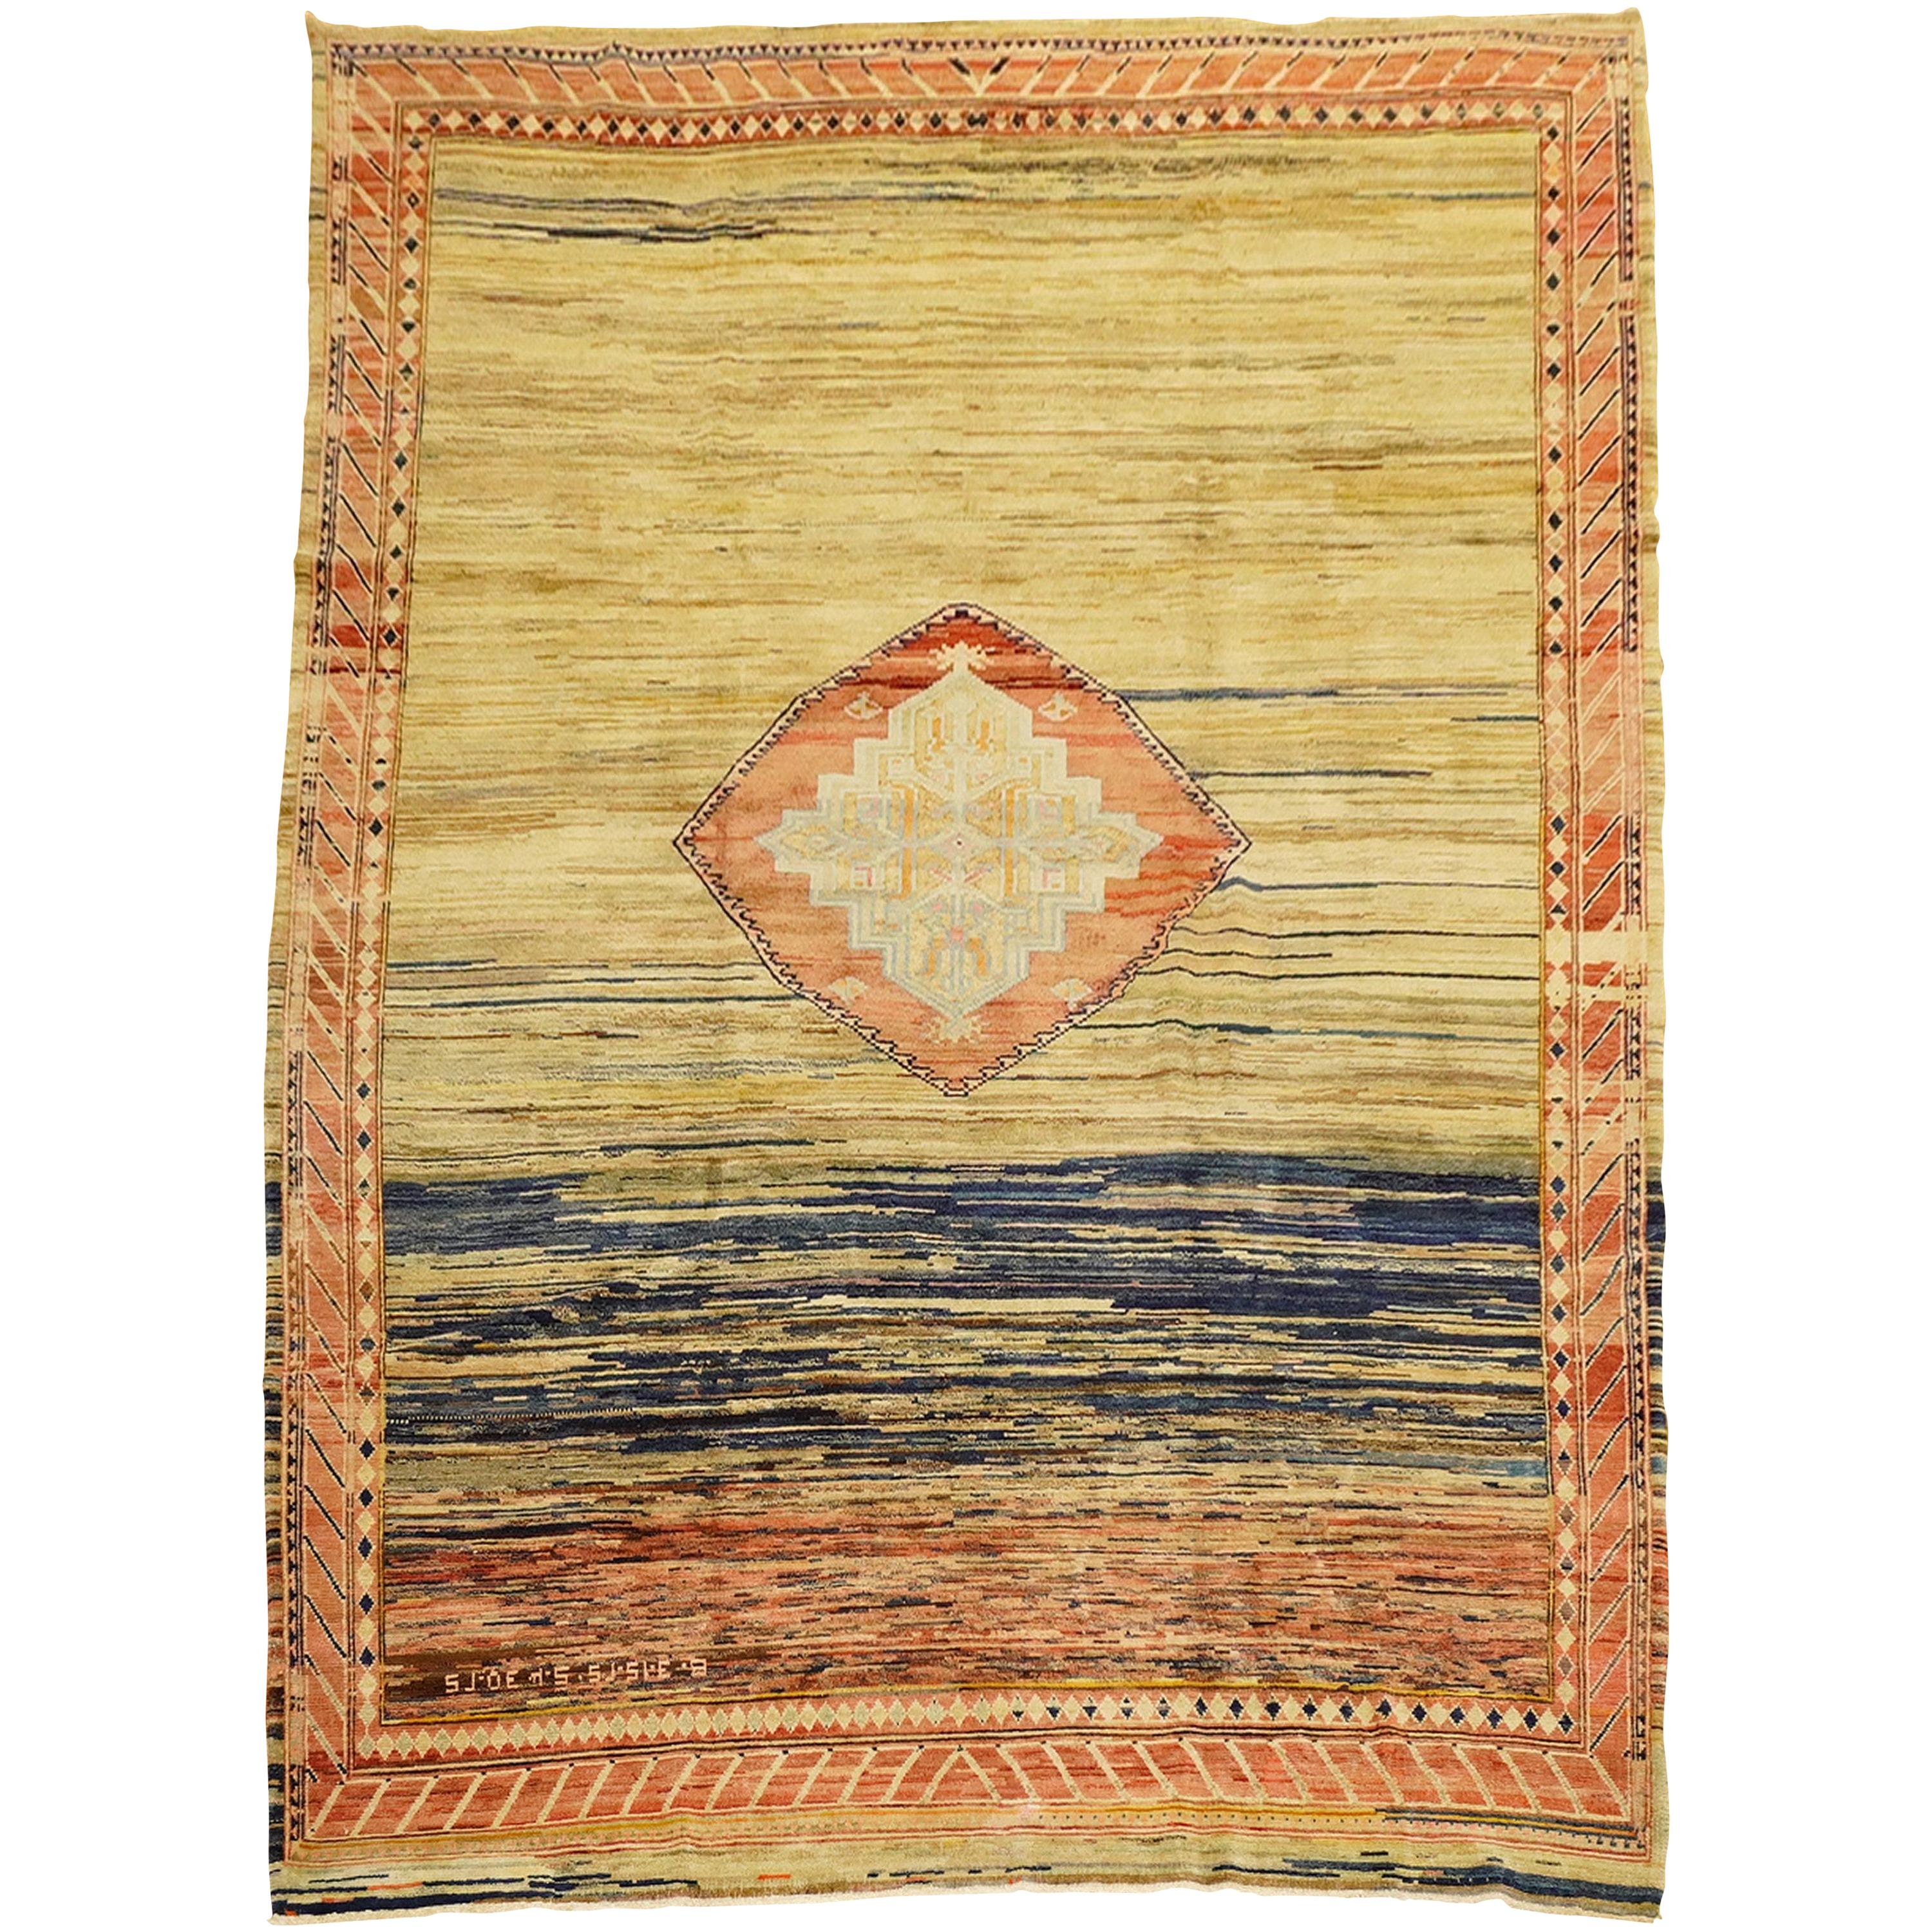 Wild Quirky Room Size Turkish Rug, Mid-20th Century